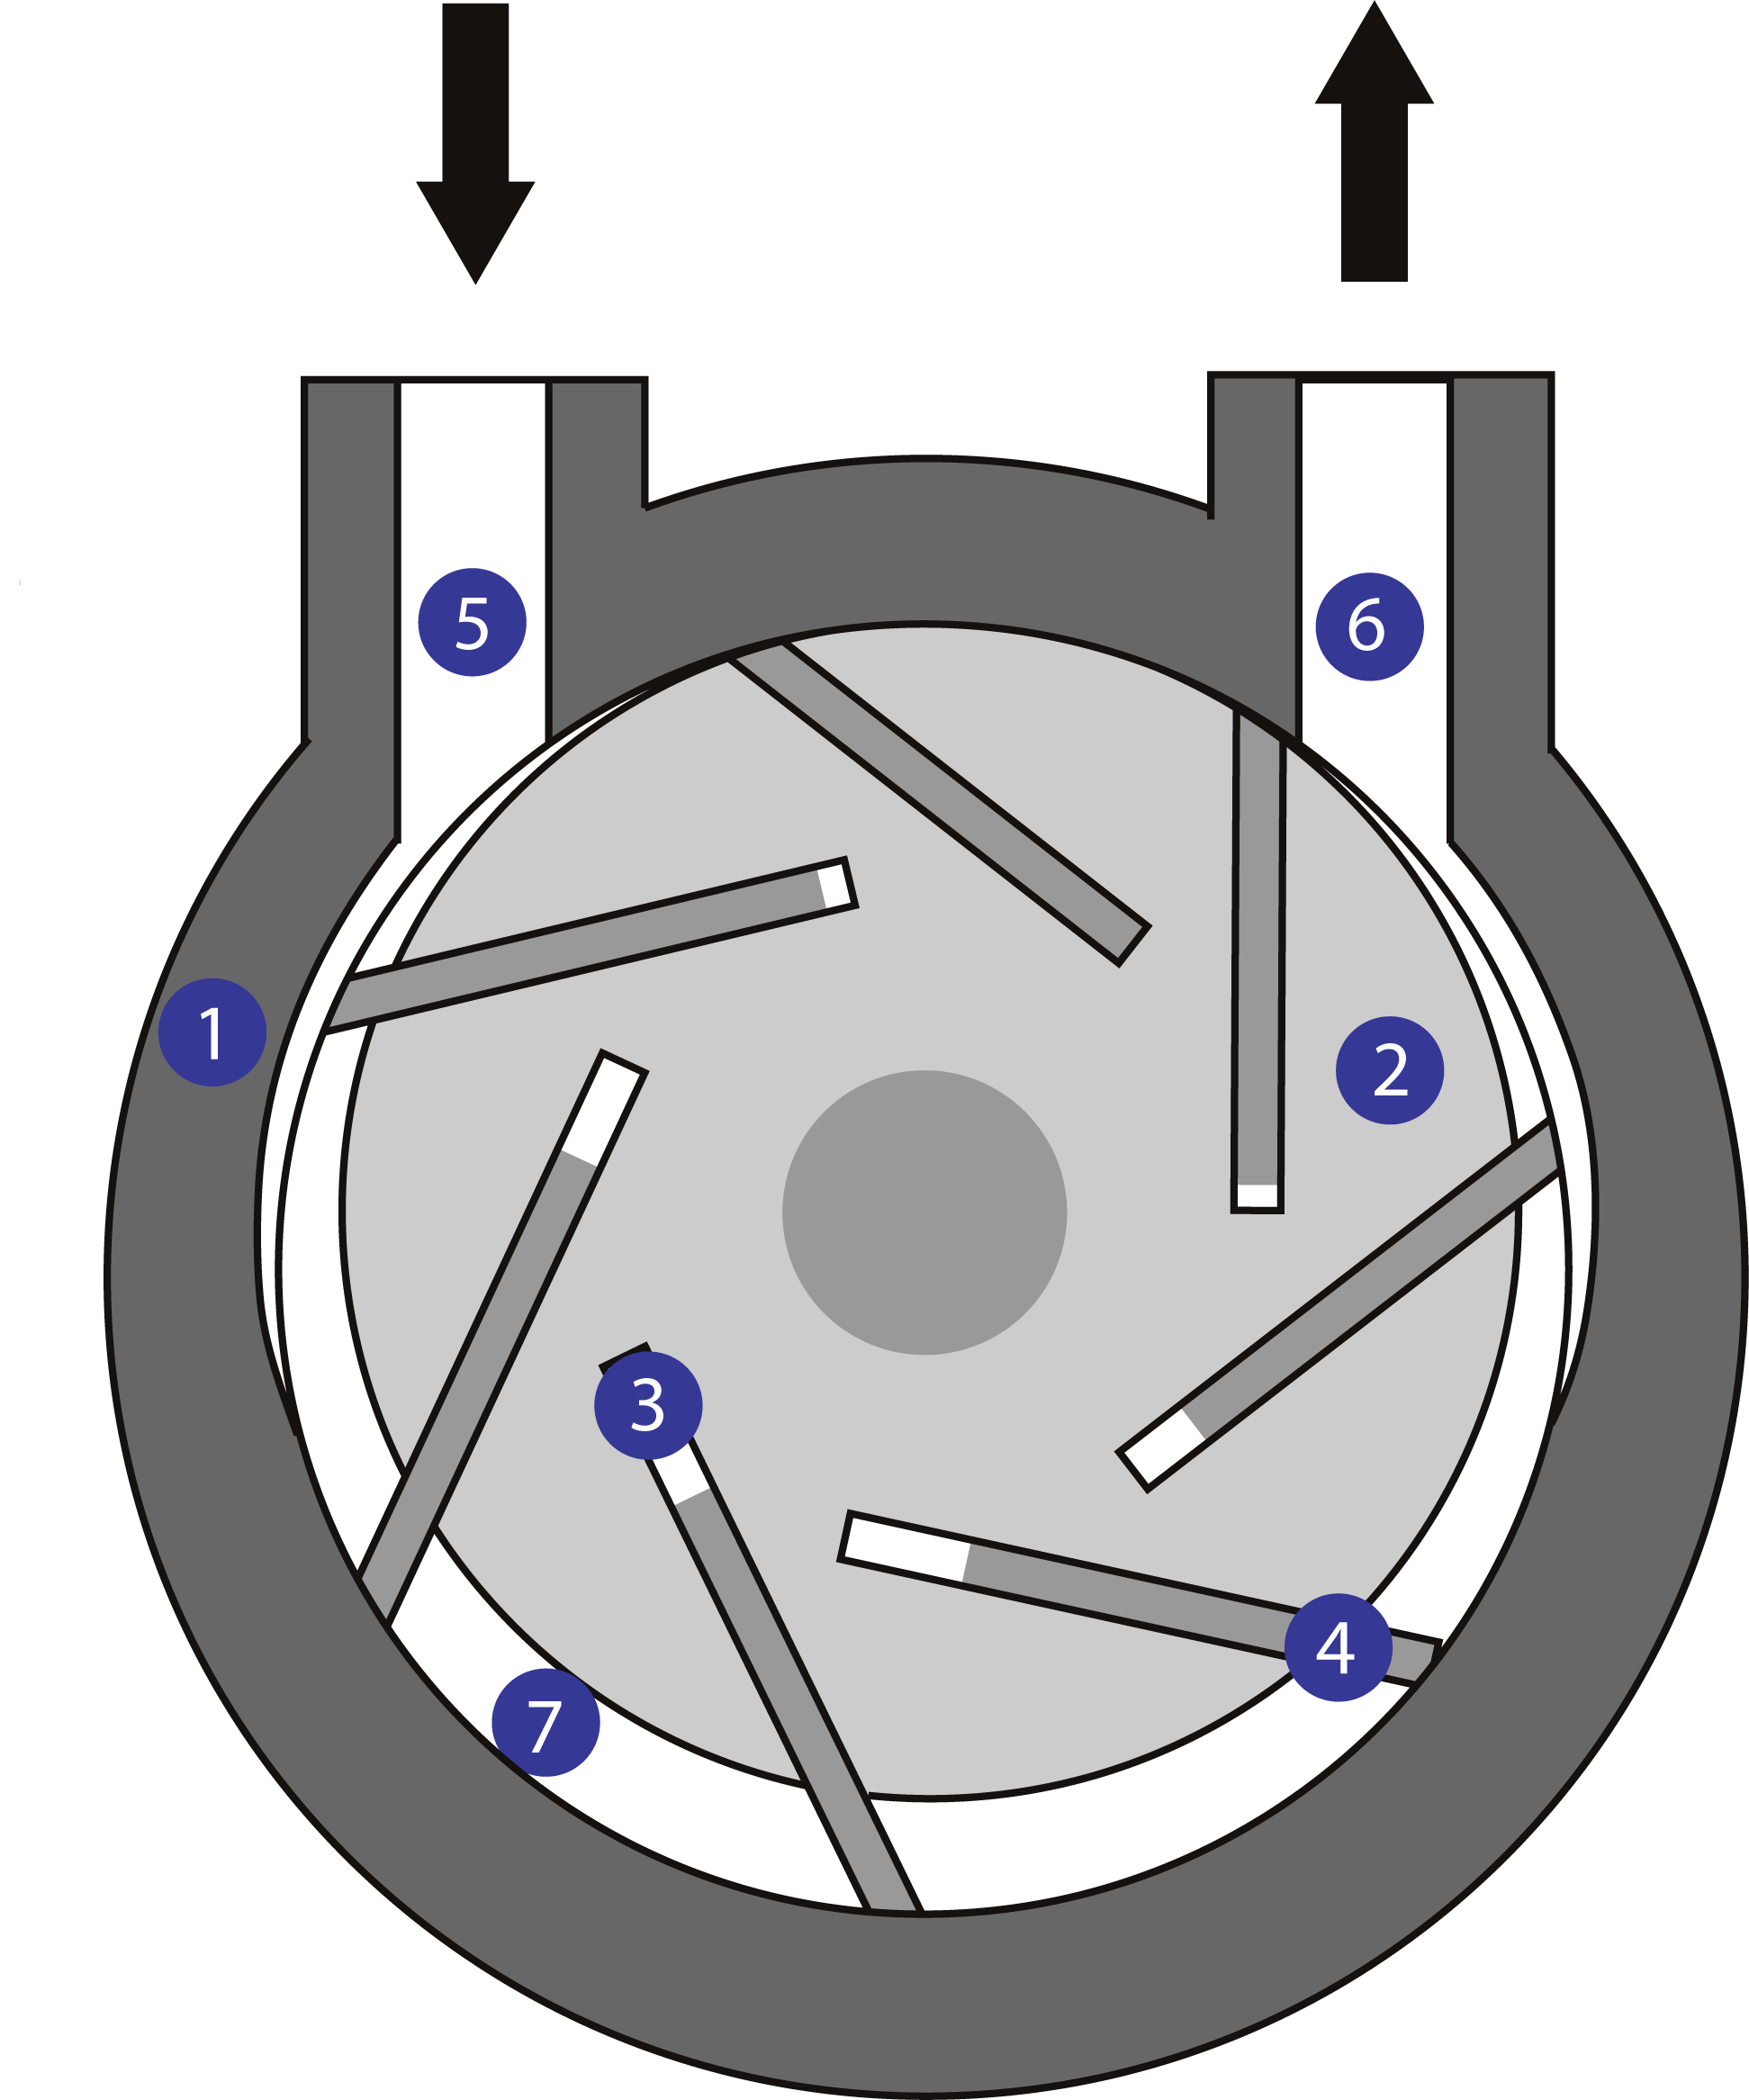 Diagram showing air pulled into the inlet of a rotary vane pump chamber, with vanes protruding from the off-center rotor. This creates a gap between the rotor and housing on one side, and as the vane spin, they push air into the gap and around to the outl